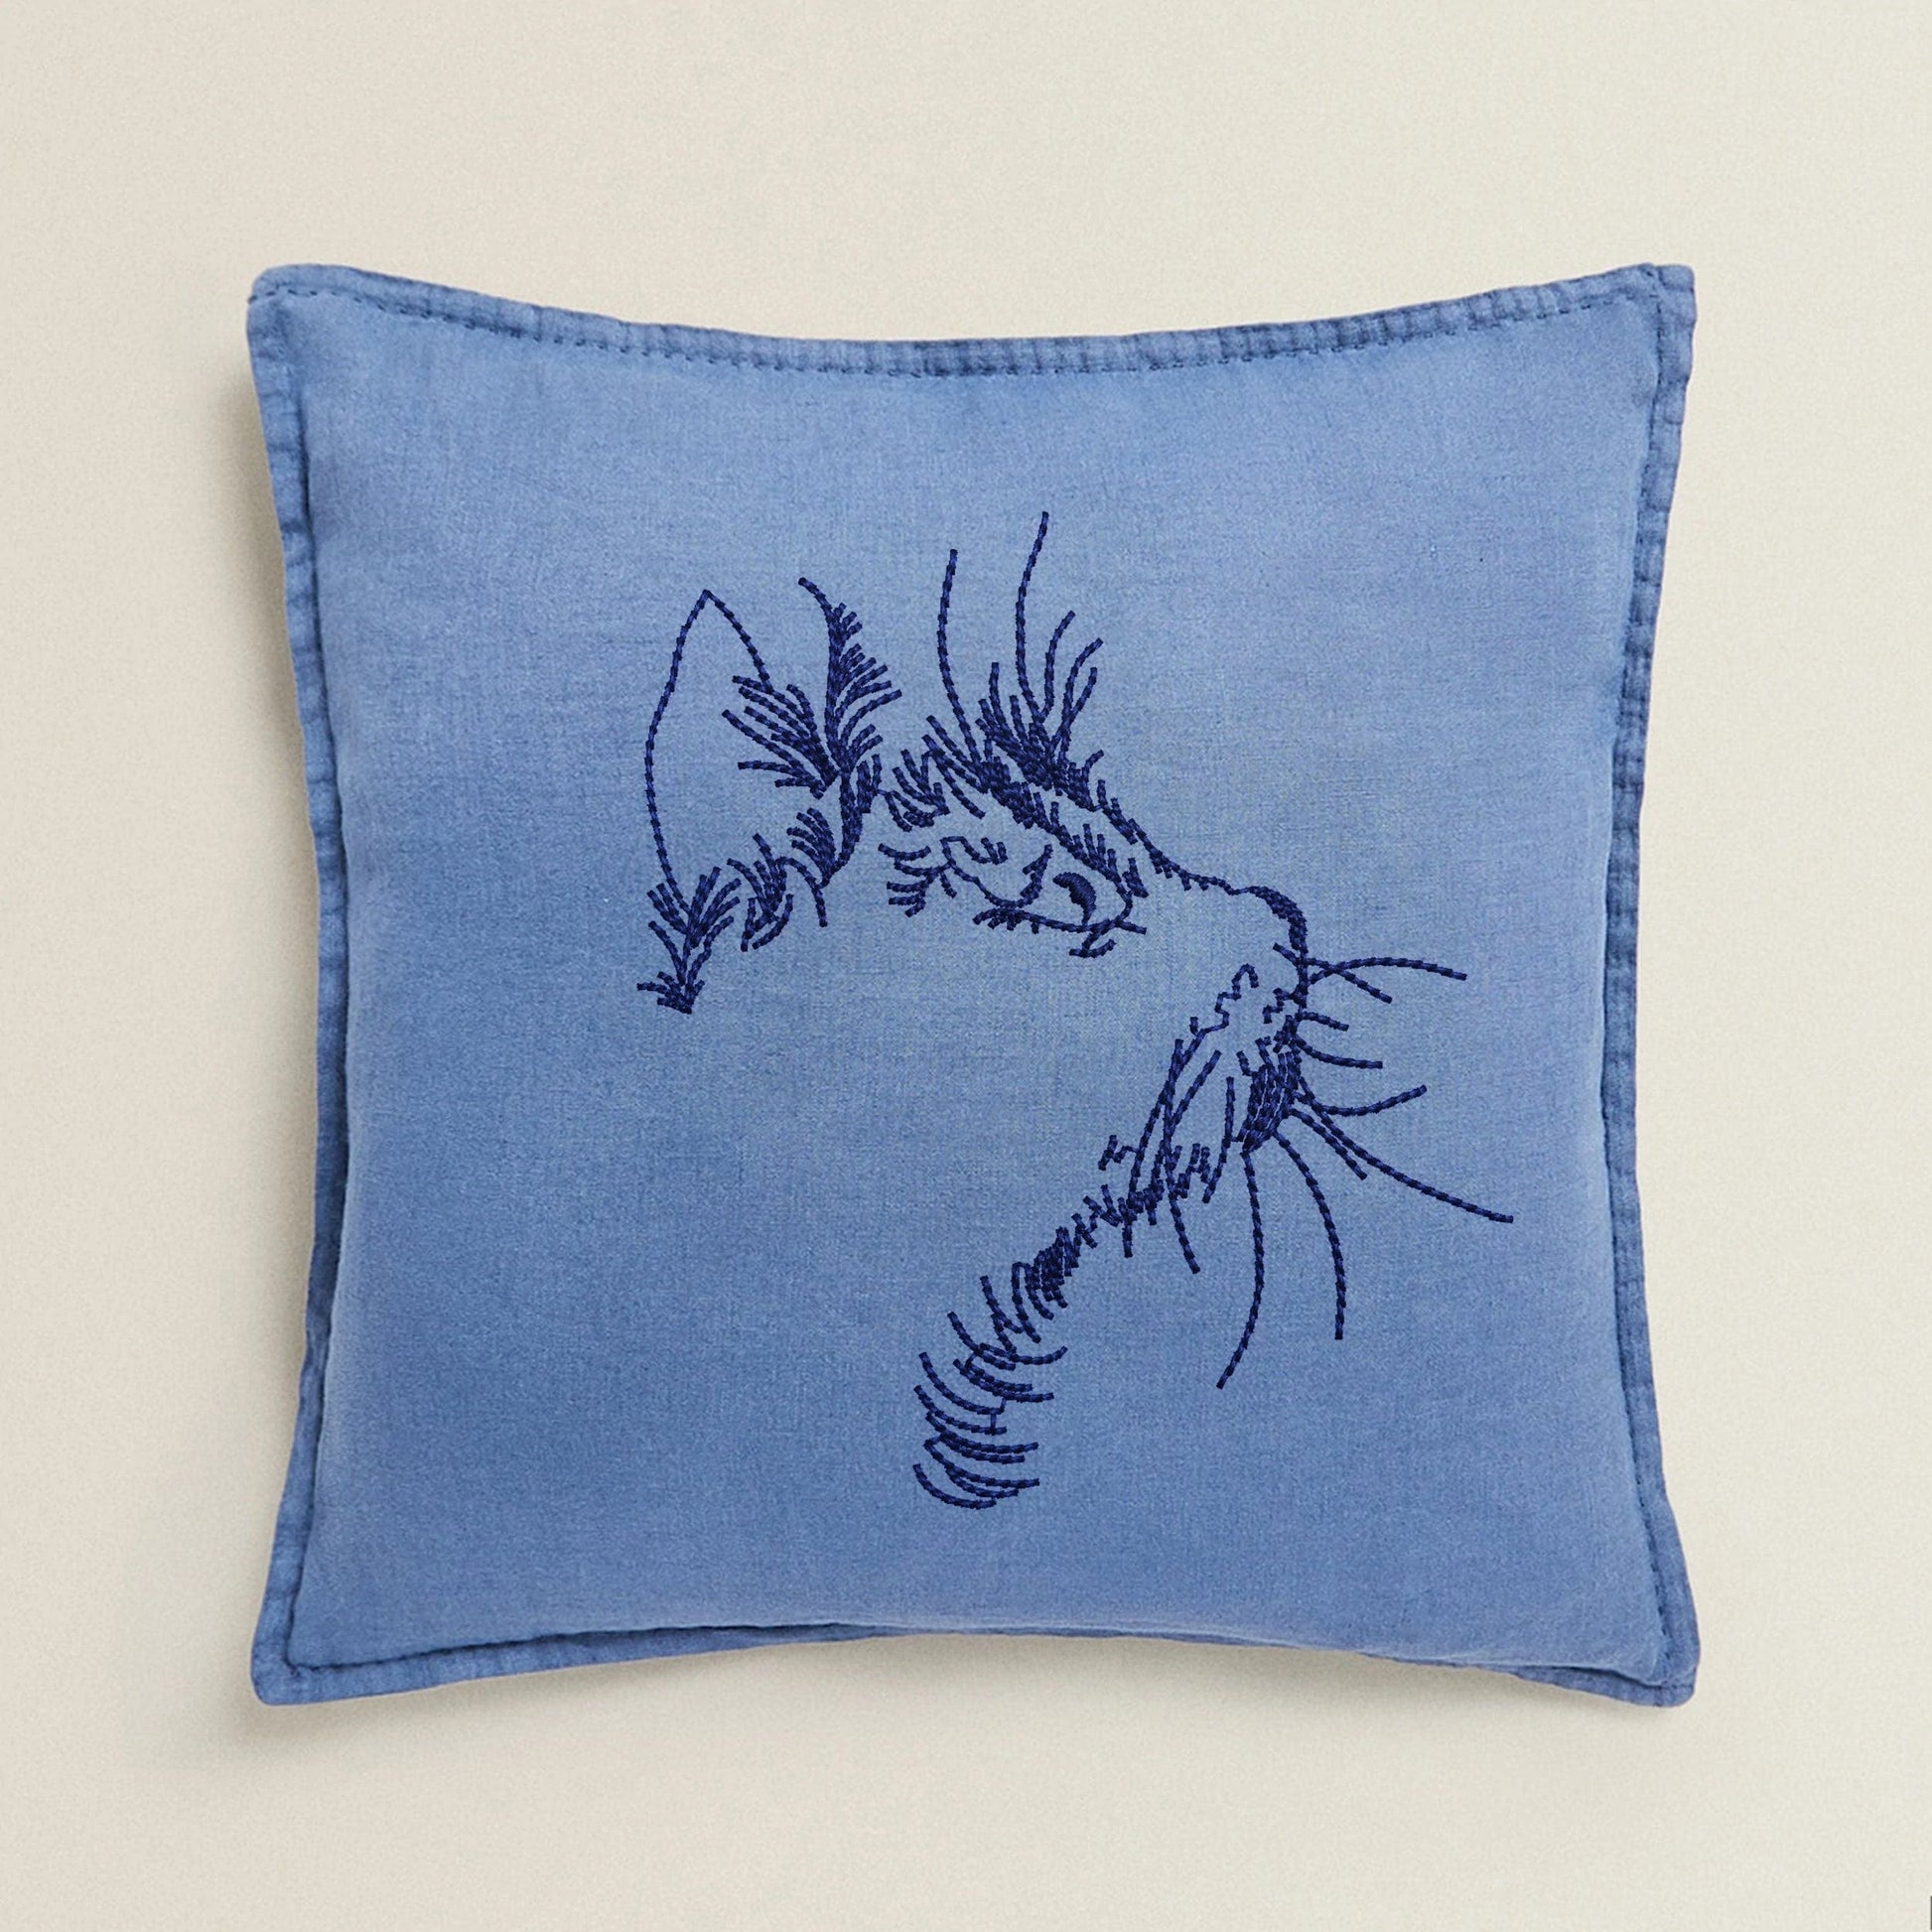 Cat Machine Embroidery Design on pillow